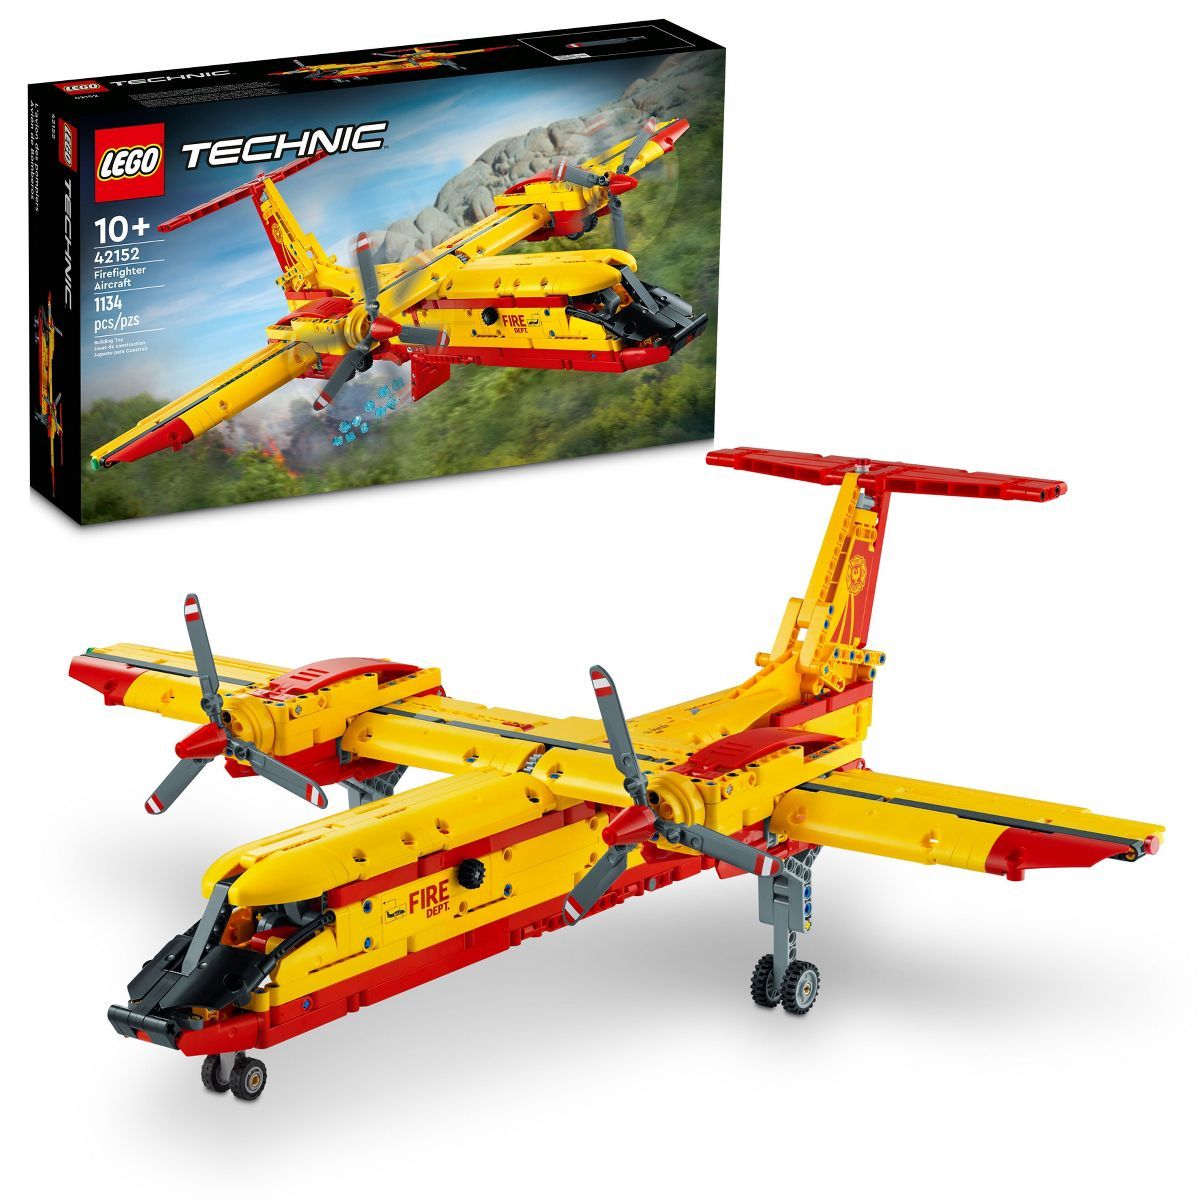 LEGO Technic Firefighter Aircraft Model Airplane Toy 42152 | Target